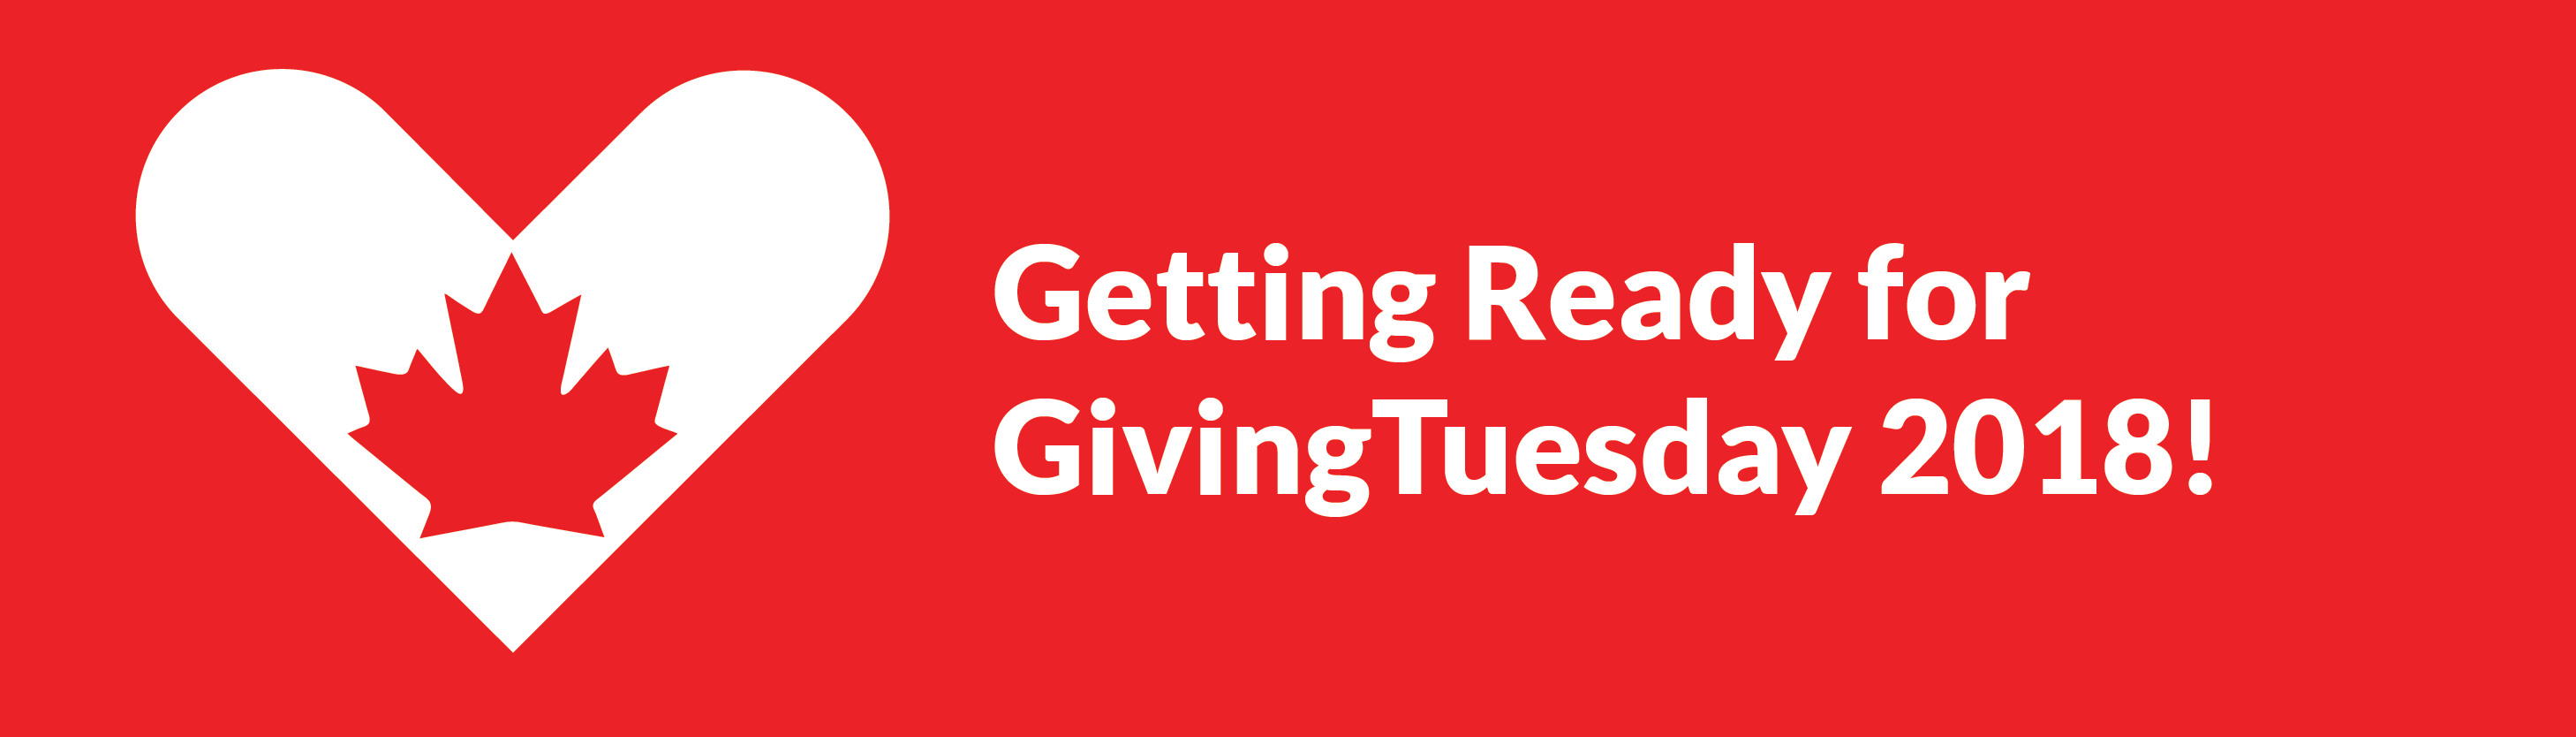 Getting Ready for Giving Tuesday